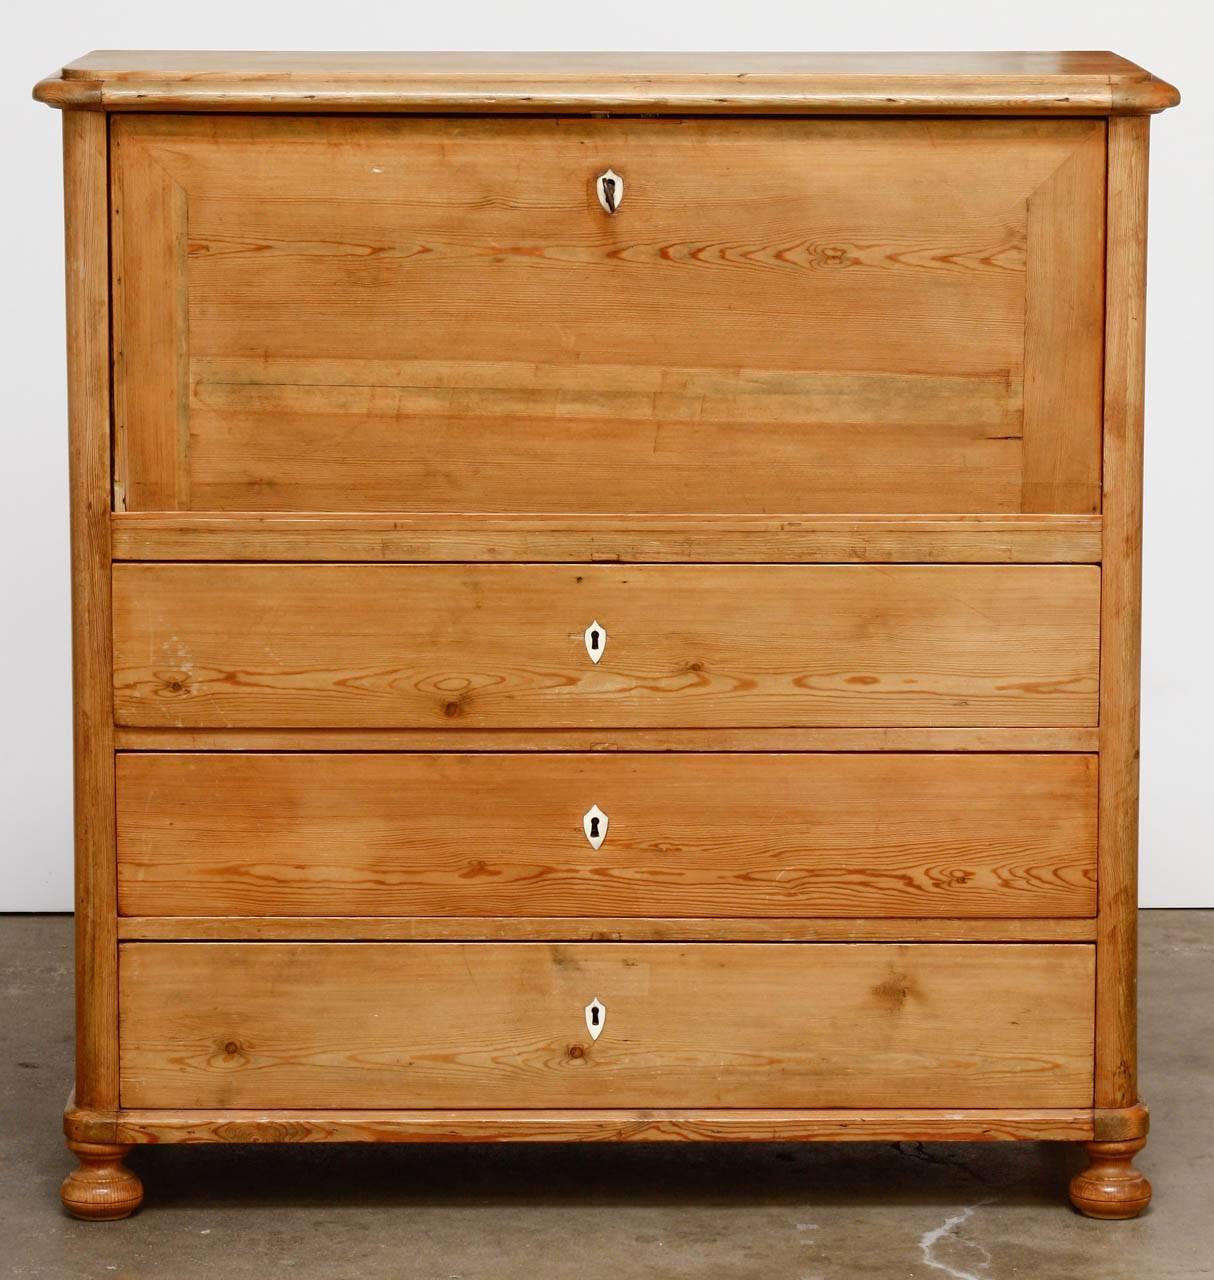 Grand 19th century English pine secretary featuring a fall front or drop front writing surface. The desk is fitted with 13 storage drawers inside the interior with bird's eye maple fronts. There is also pigeon holes and a locking door with a bird's